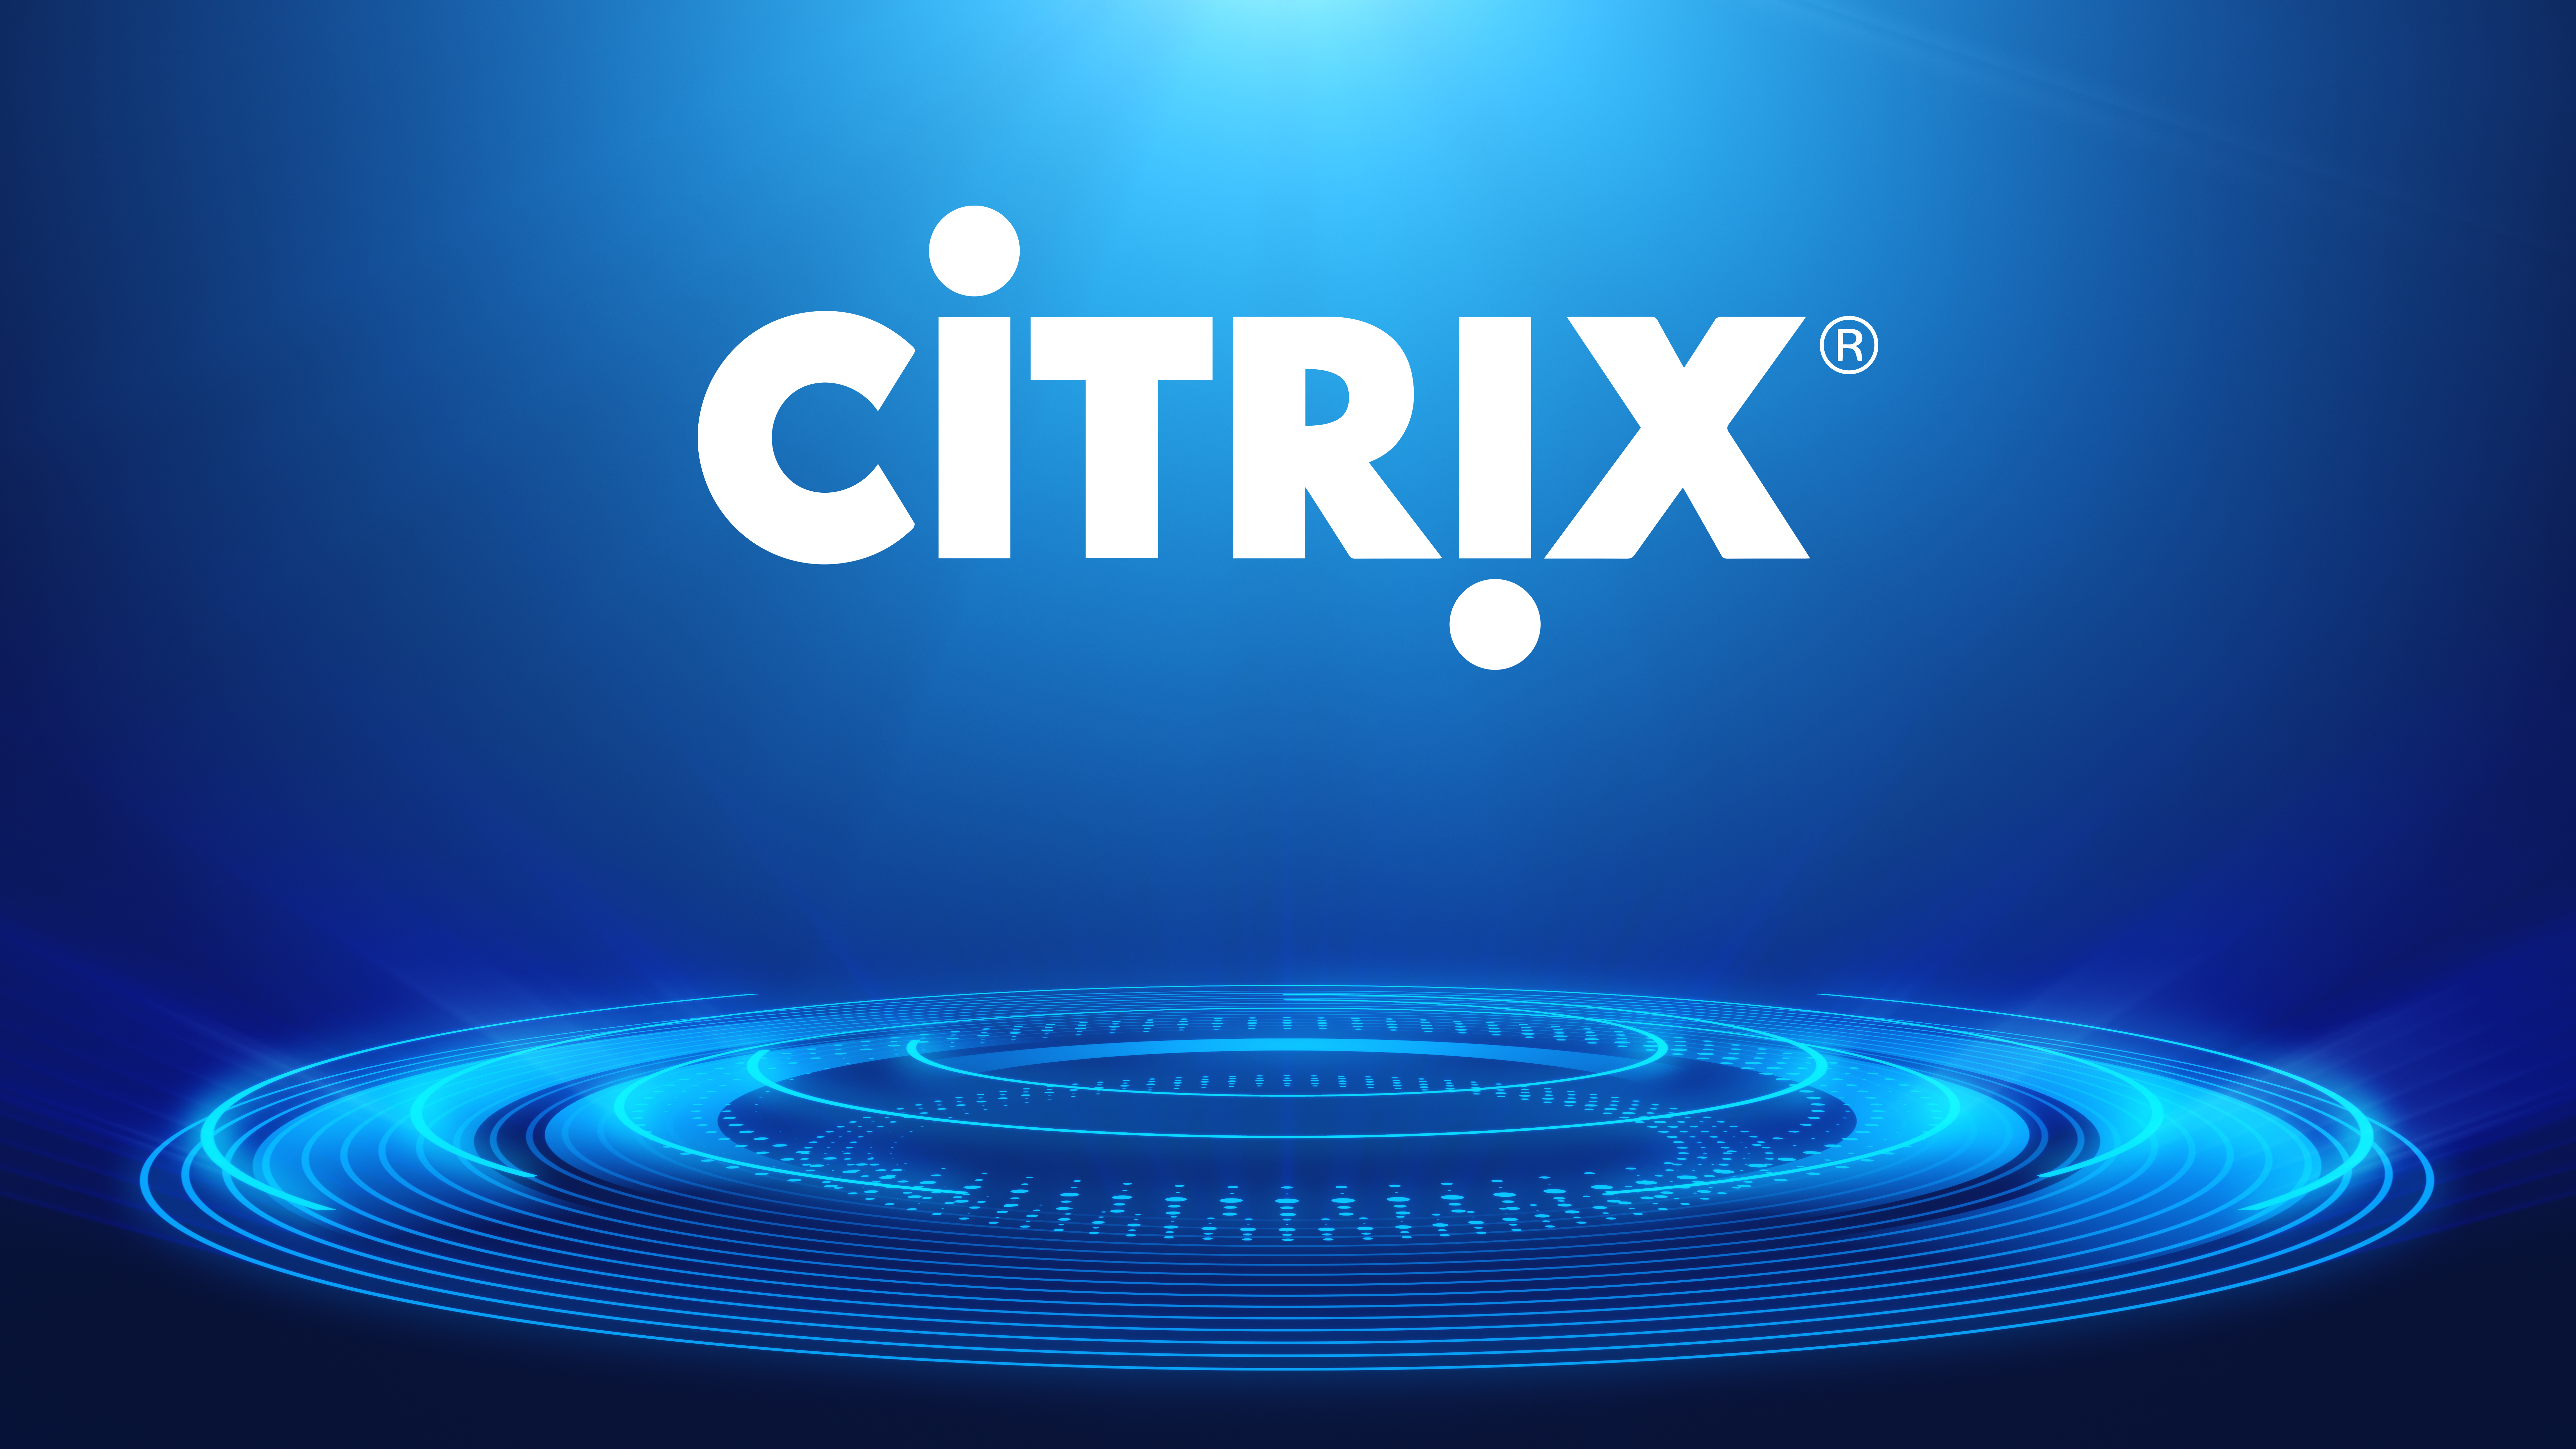 Citrix Managed Services is Crucial to Your Business